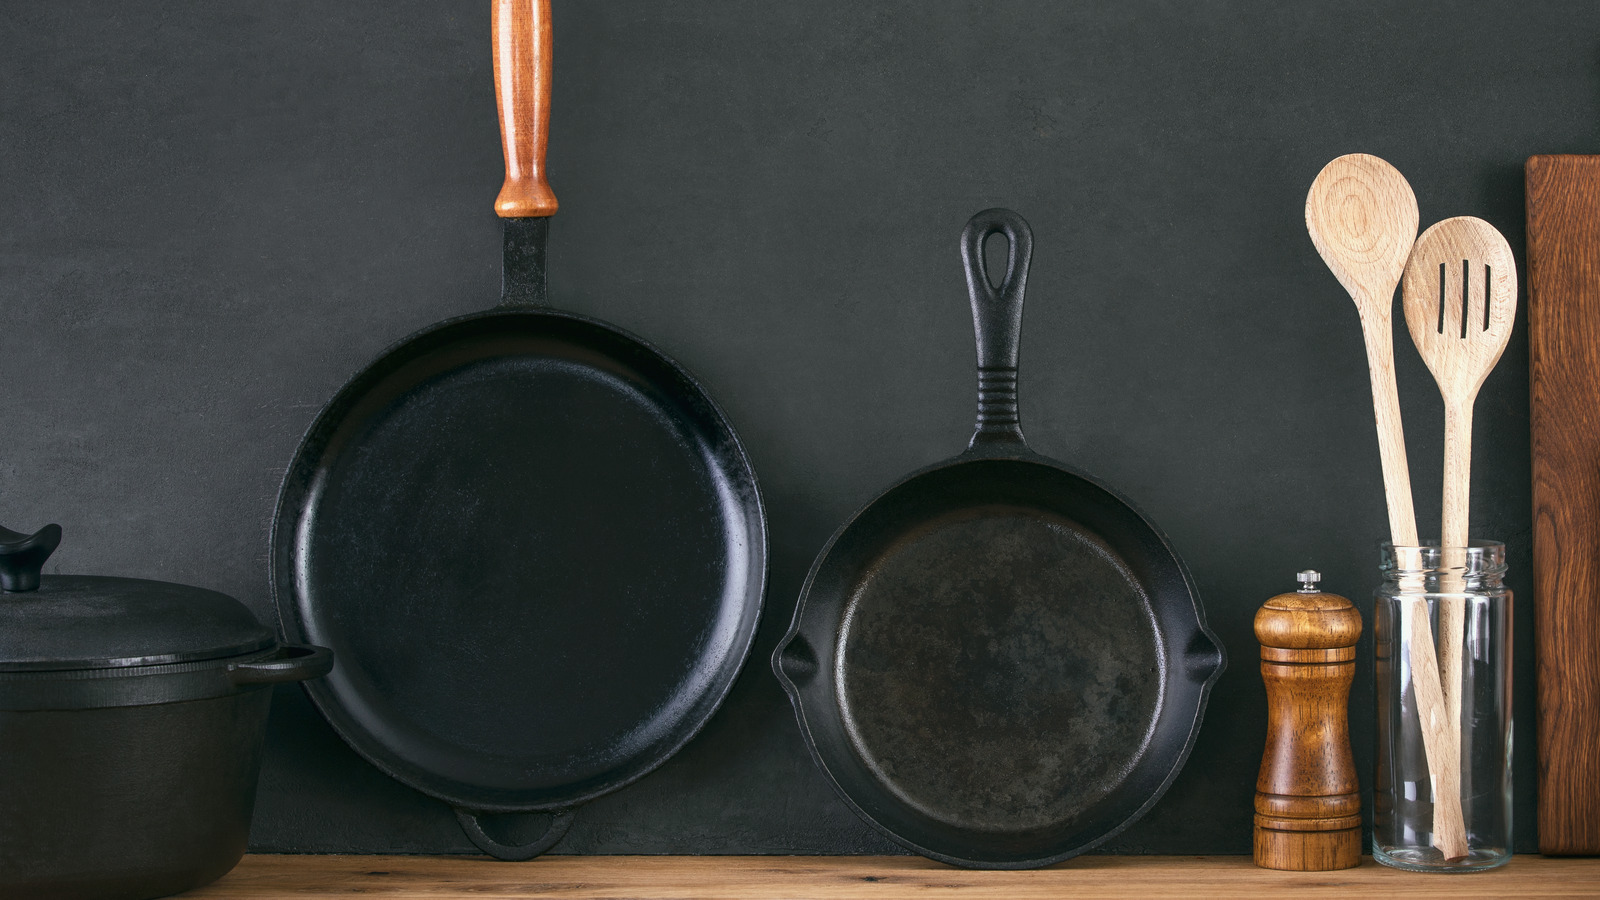 https://www.tastingtable.com/img/gallery/the-best-oils-to-use-with-your-cast-iron-pan/l-intro-1664906889.jpg